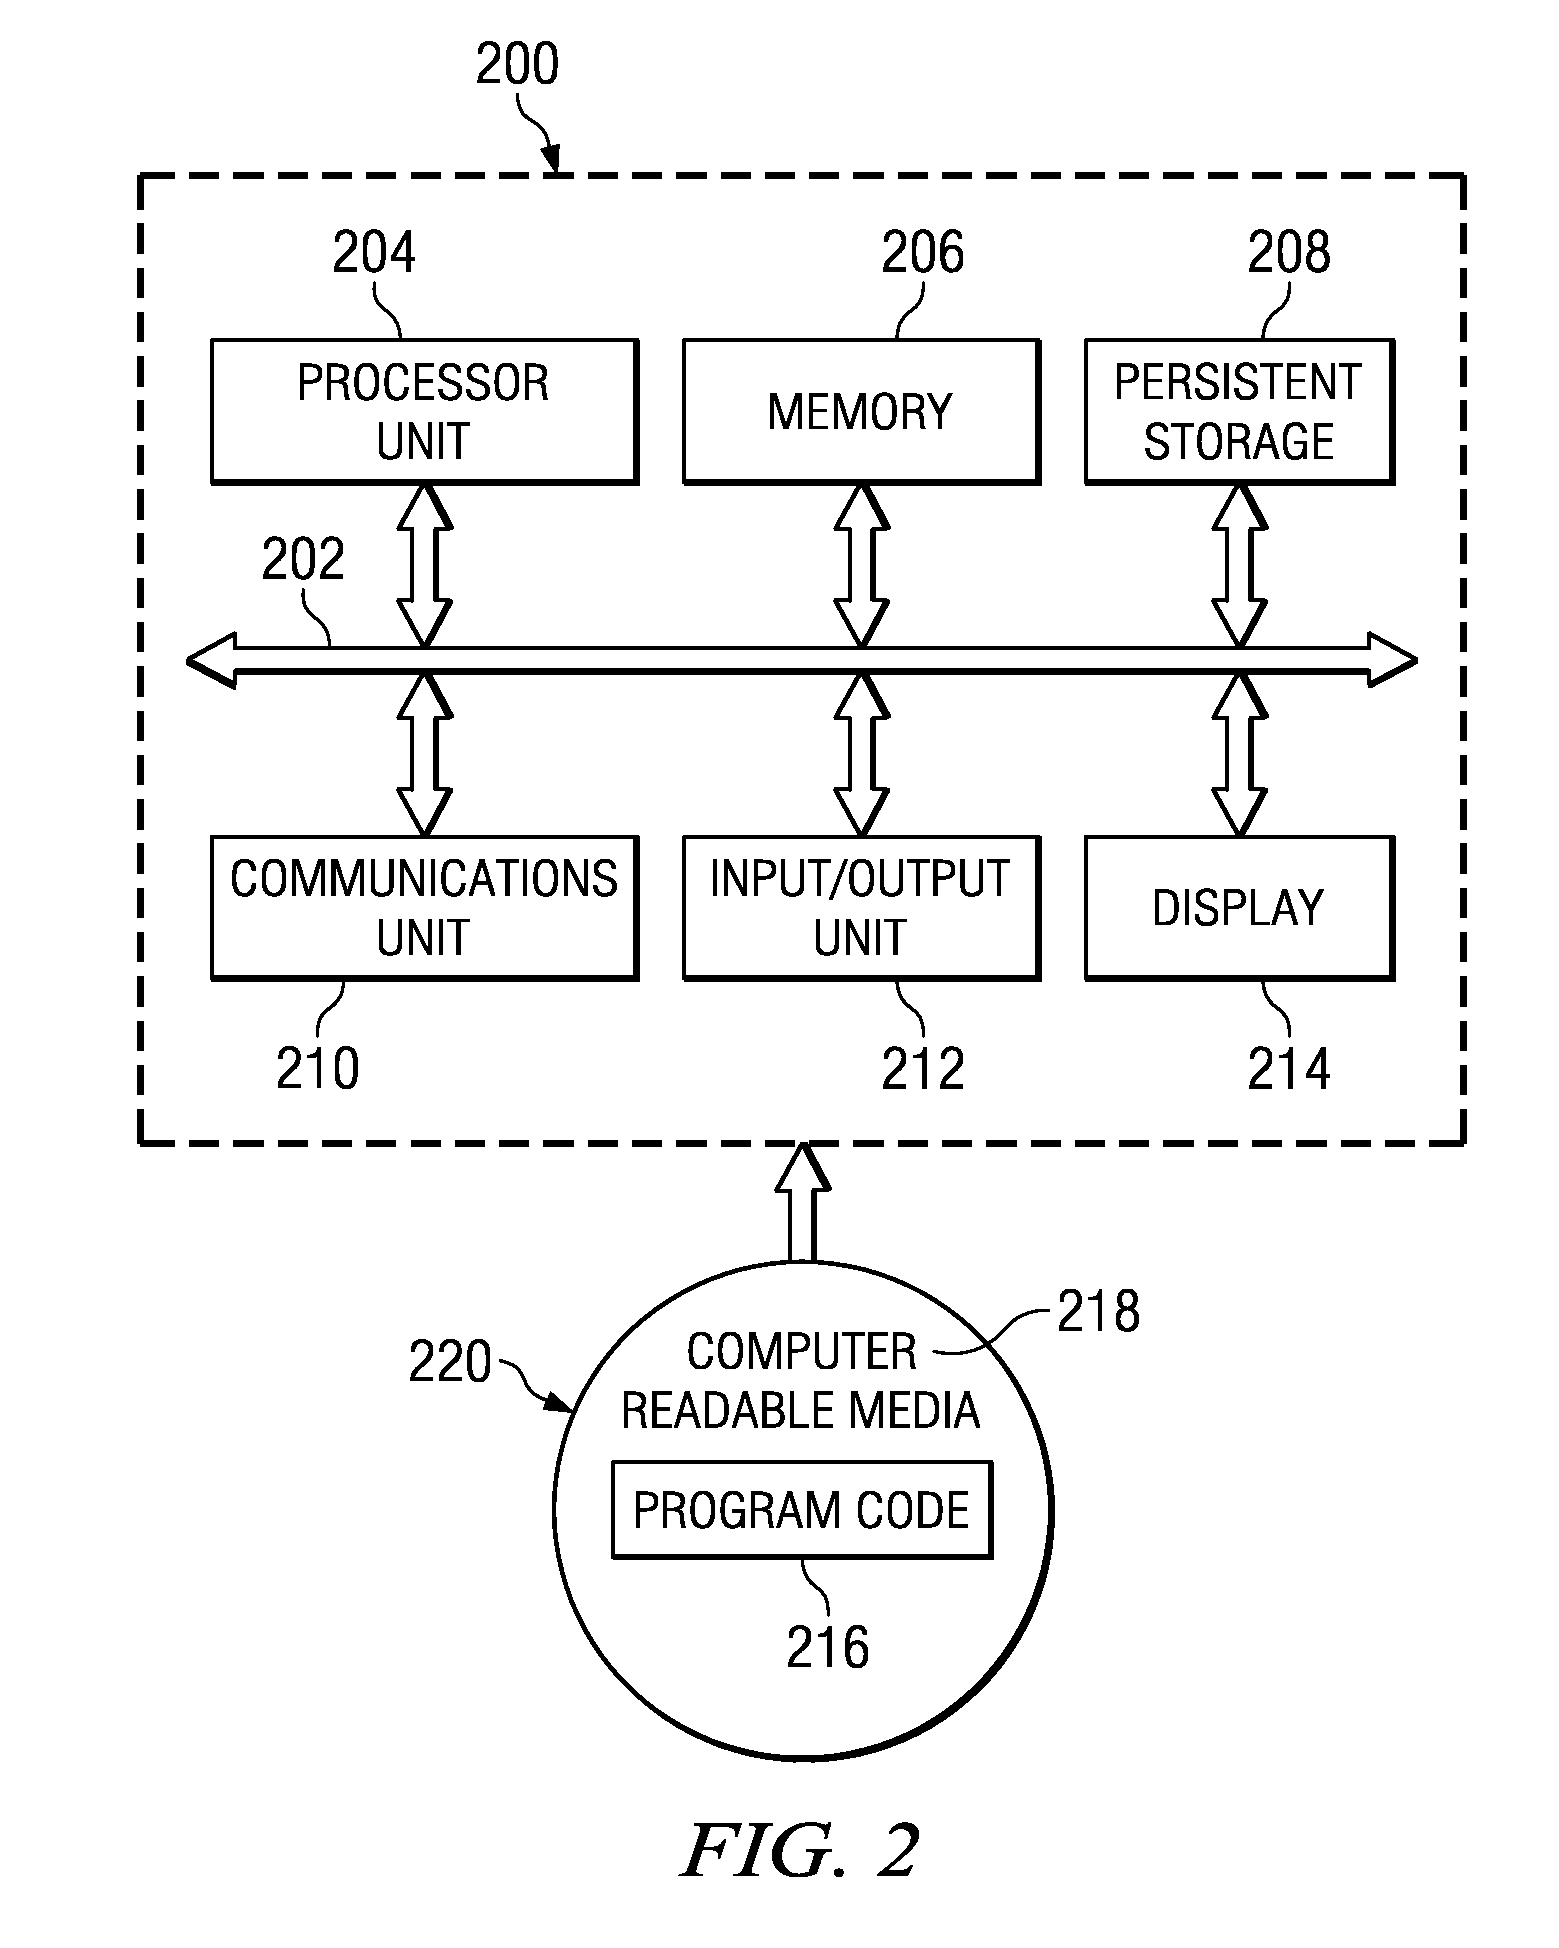 Method and apparatus for identifying noise sources